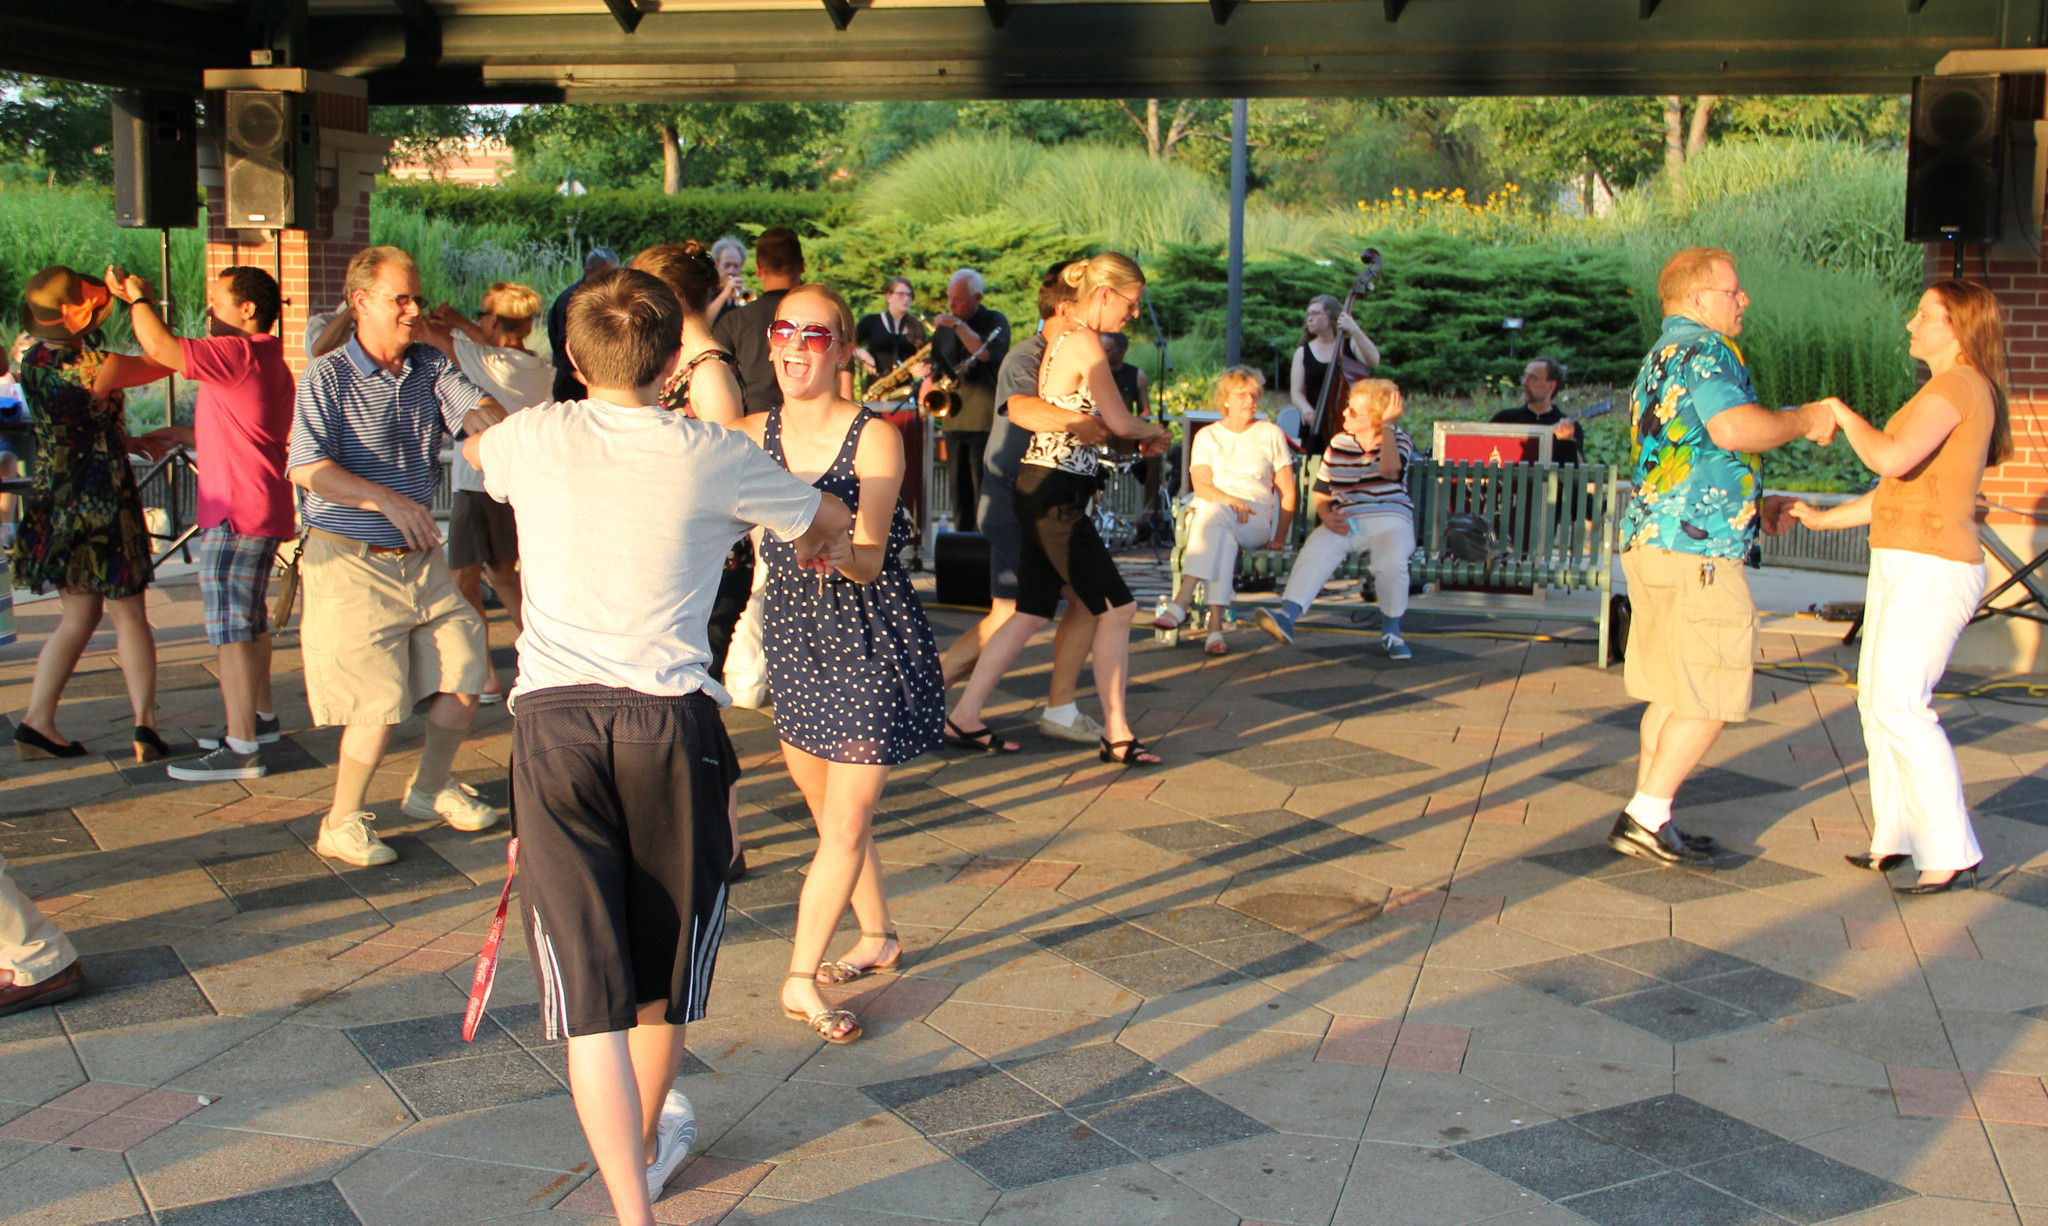 Schaumburg Summer Dance Concerts return June 7 to Town Square Chicago